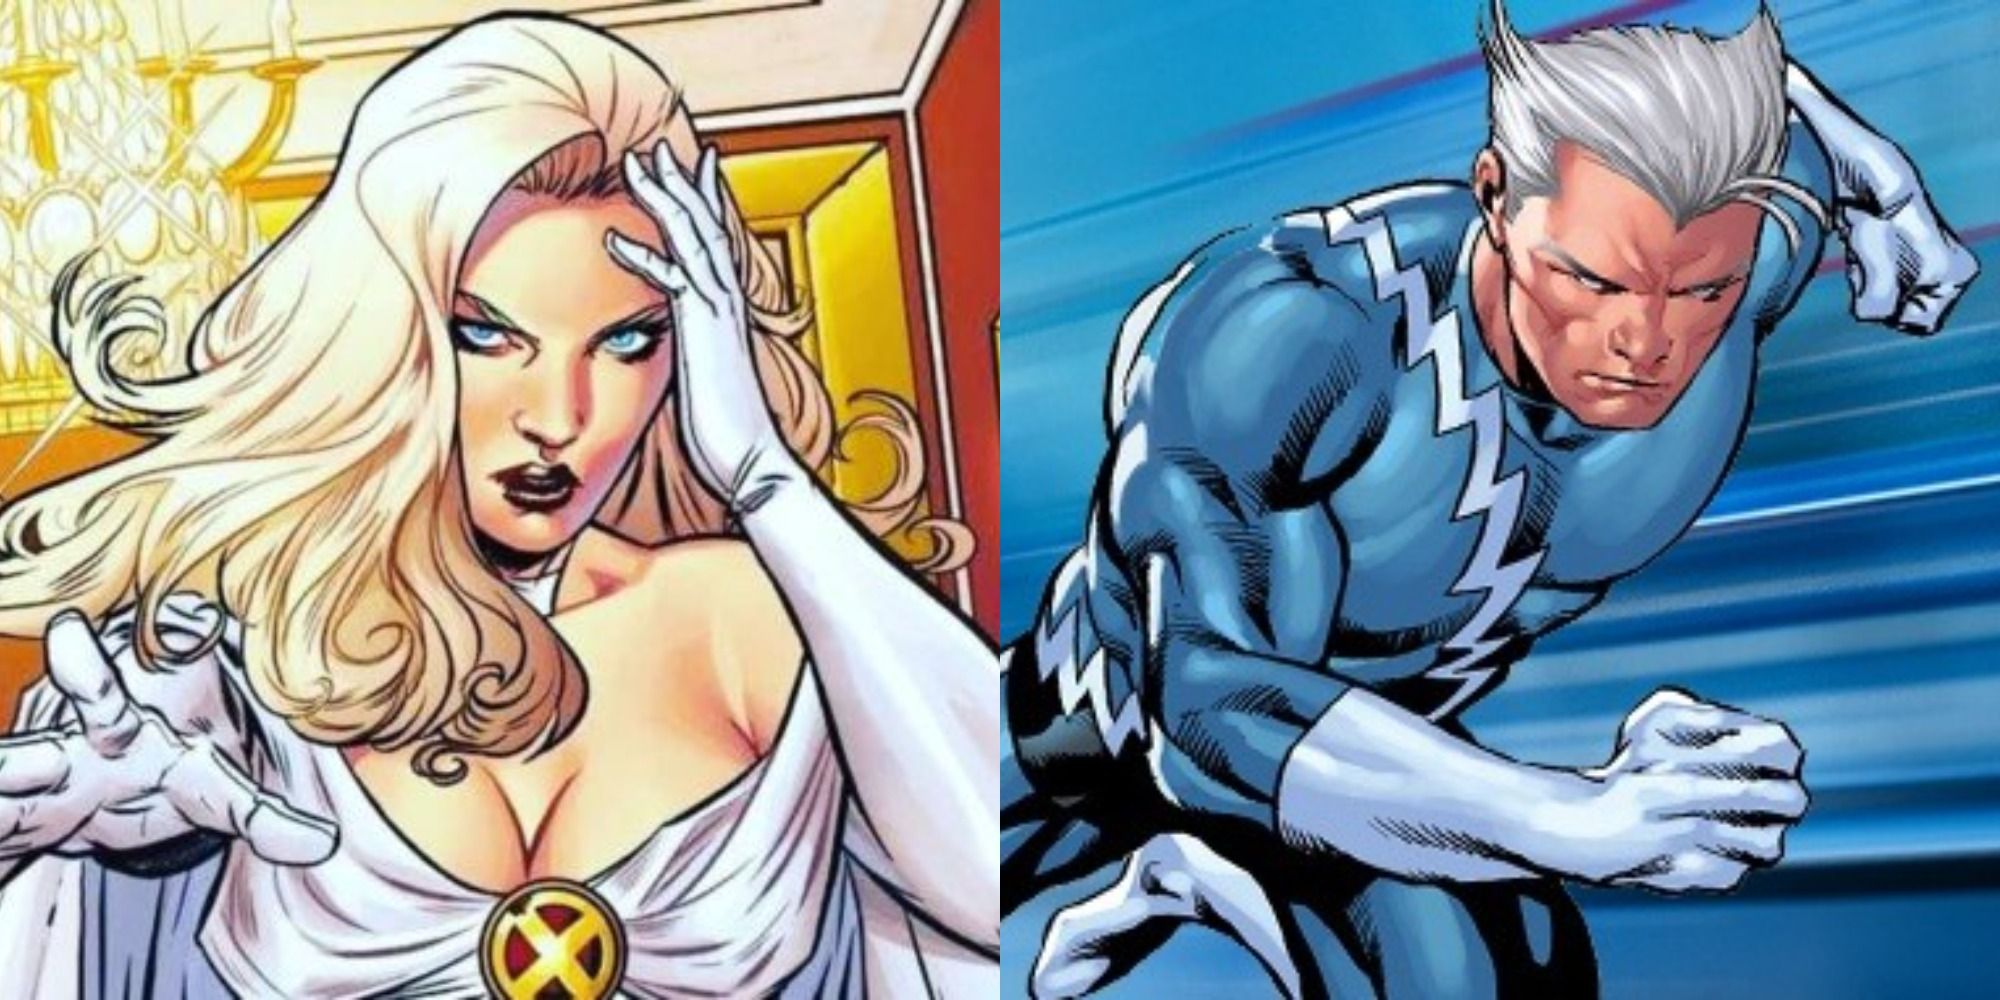 Split image showing Emma Frost and Quicksilver in Marvel Comics